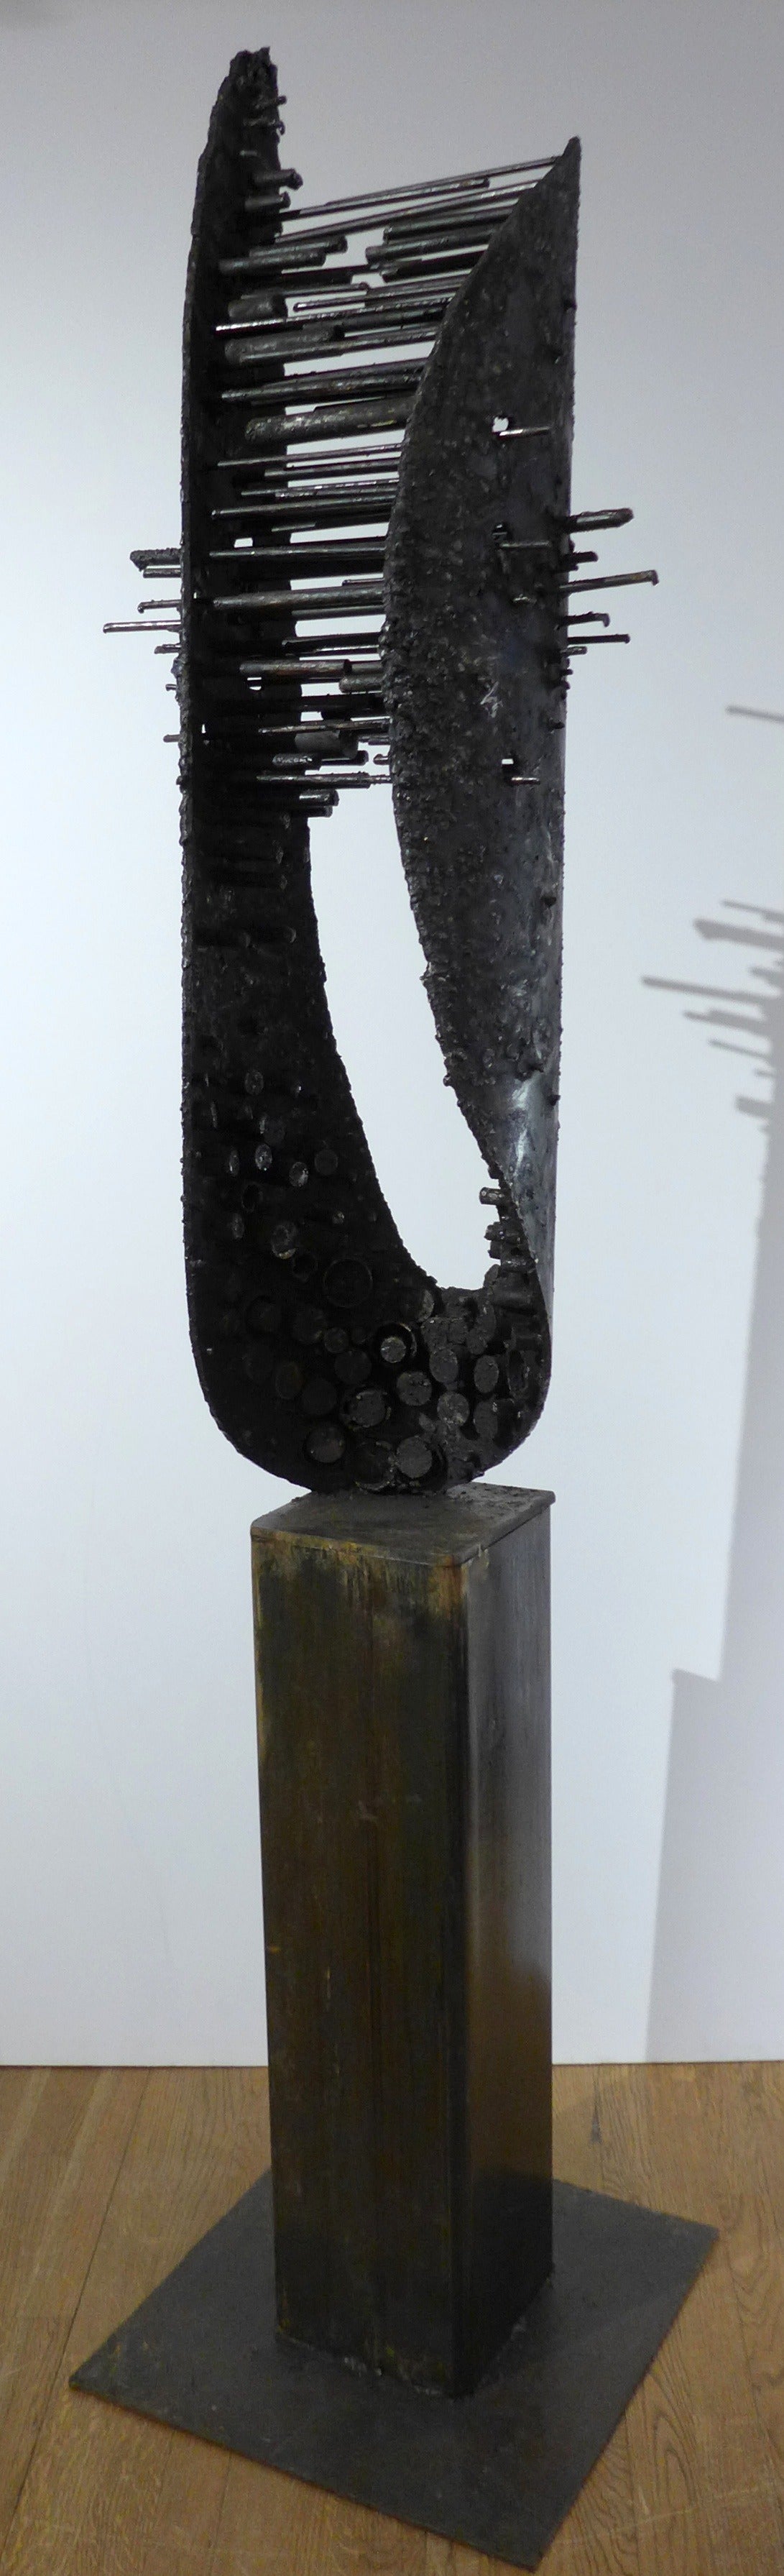 Abstract sculpture of welded, blackened and textured steel by Des Moines artist James Anthony Bearden. Titled 